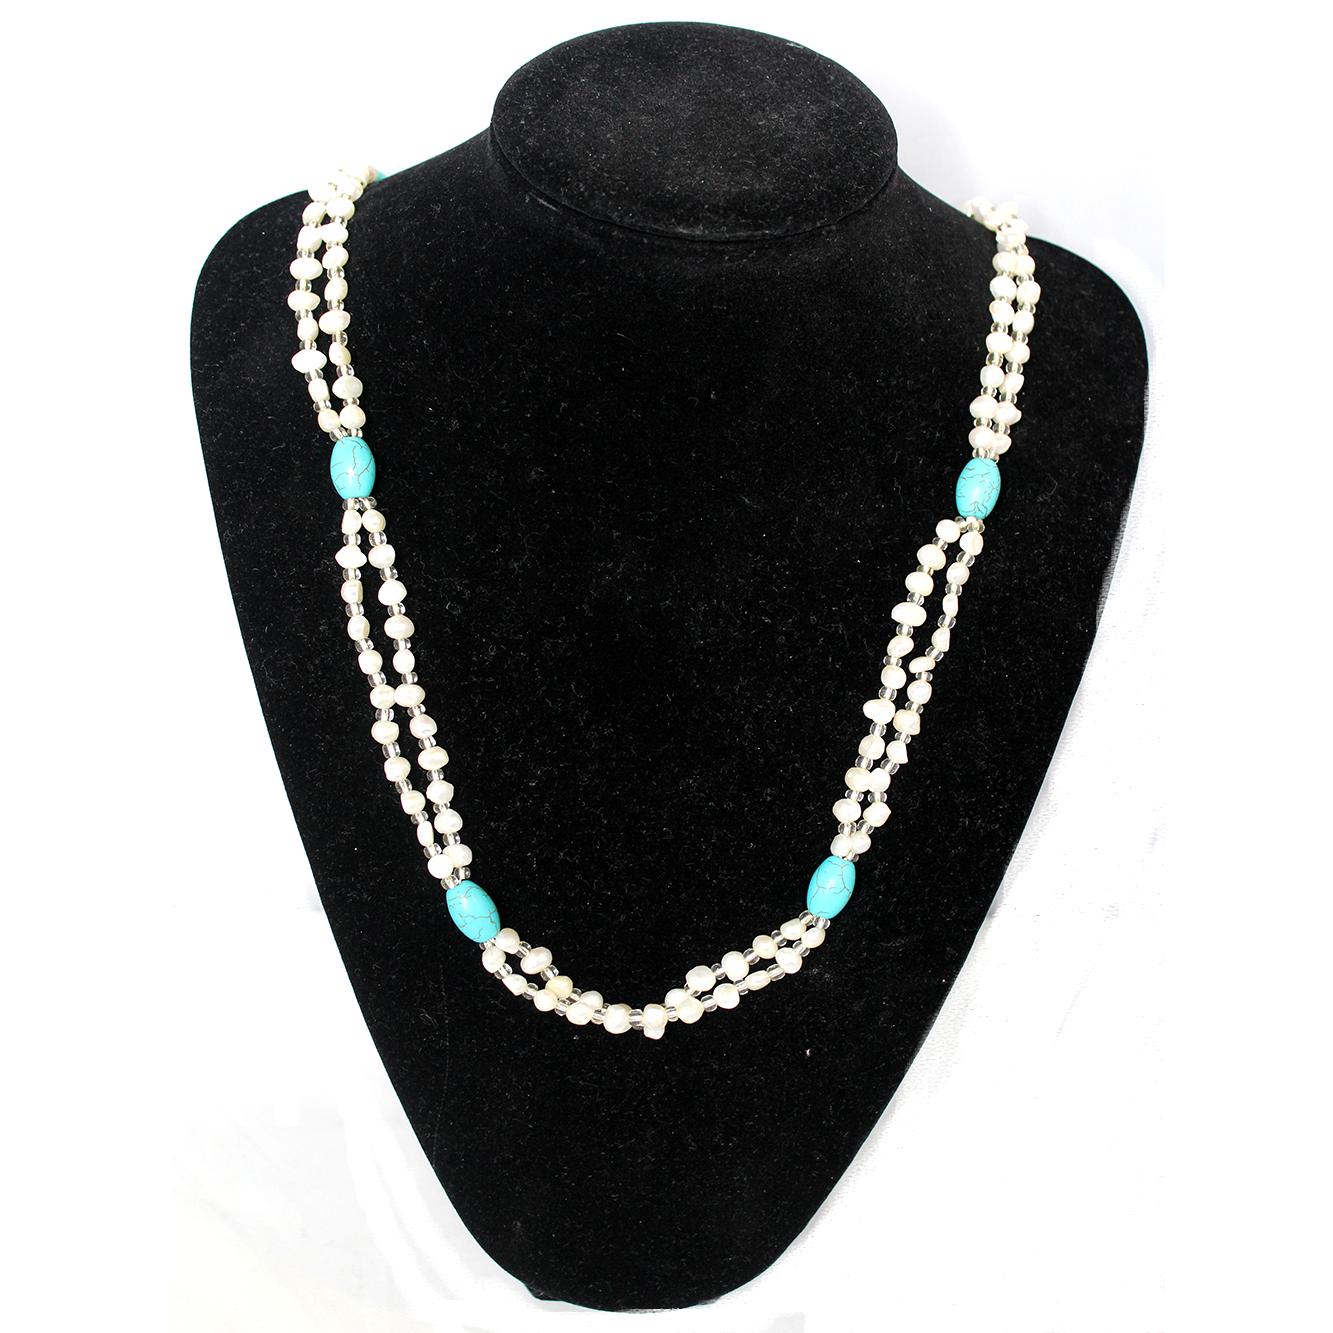 2 Strand Fresh Water Pearl Necklace with Blue Turquoise, 6 & 8mm, 31 inch - Butterfly Beads